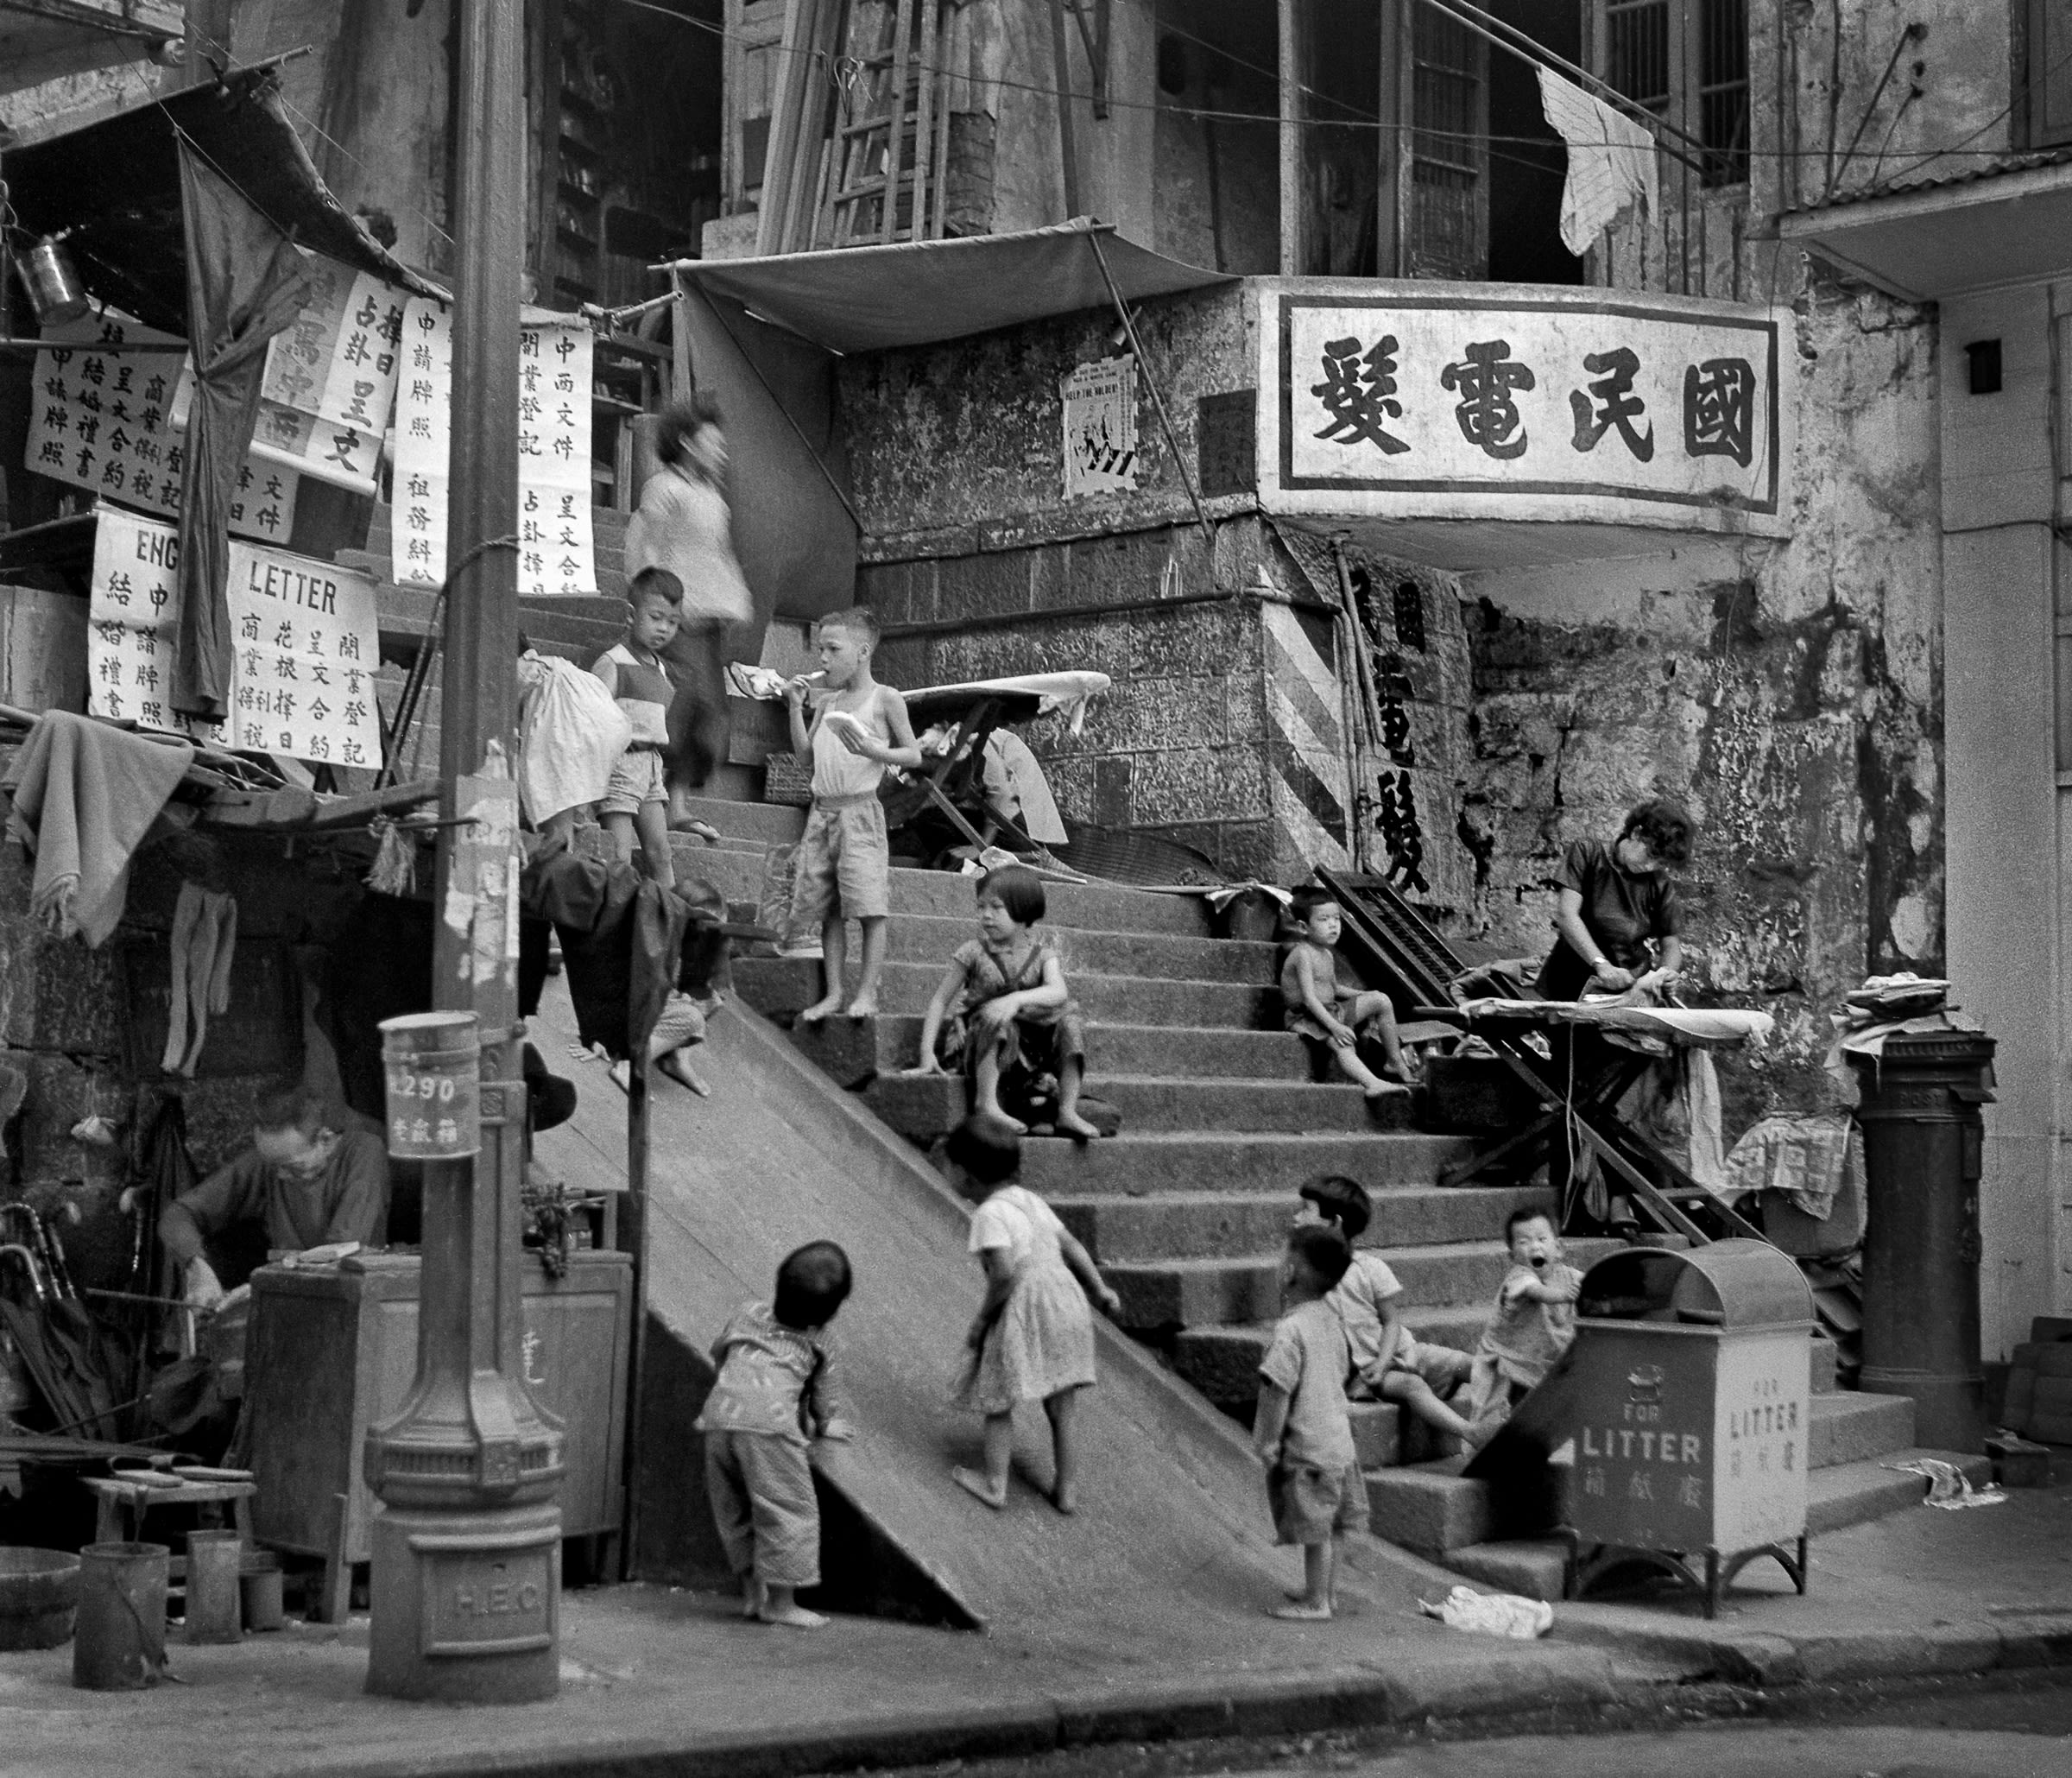 Pictures by legendary  master of Hong Kong street photography, Fan Ho, feature in the exhibition.